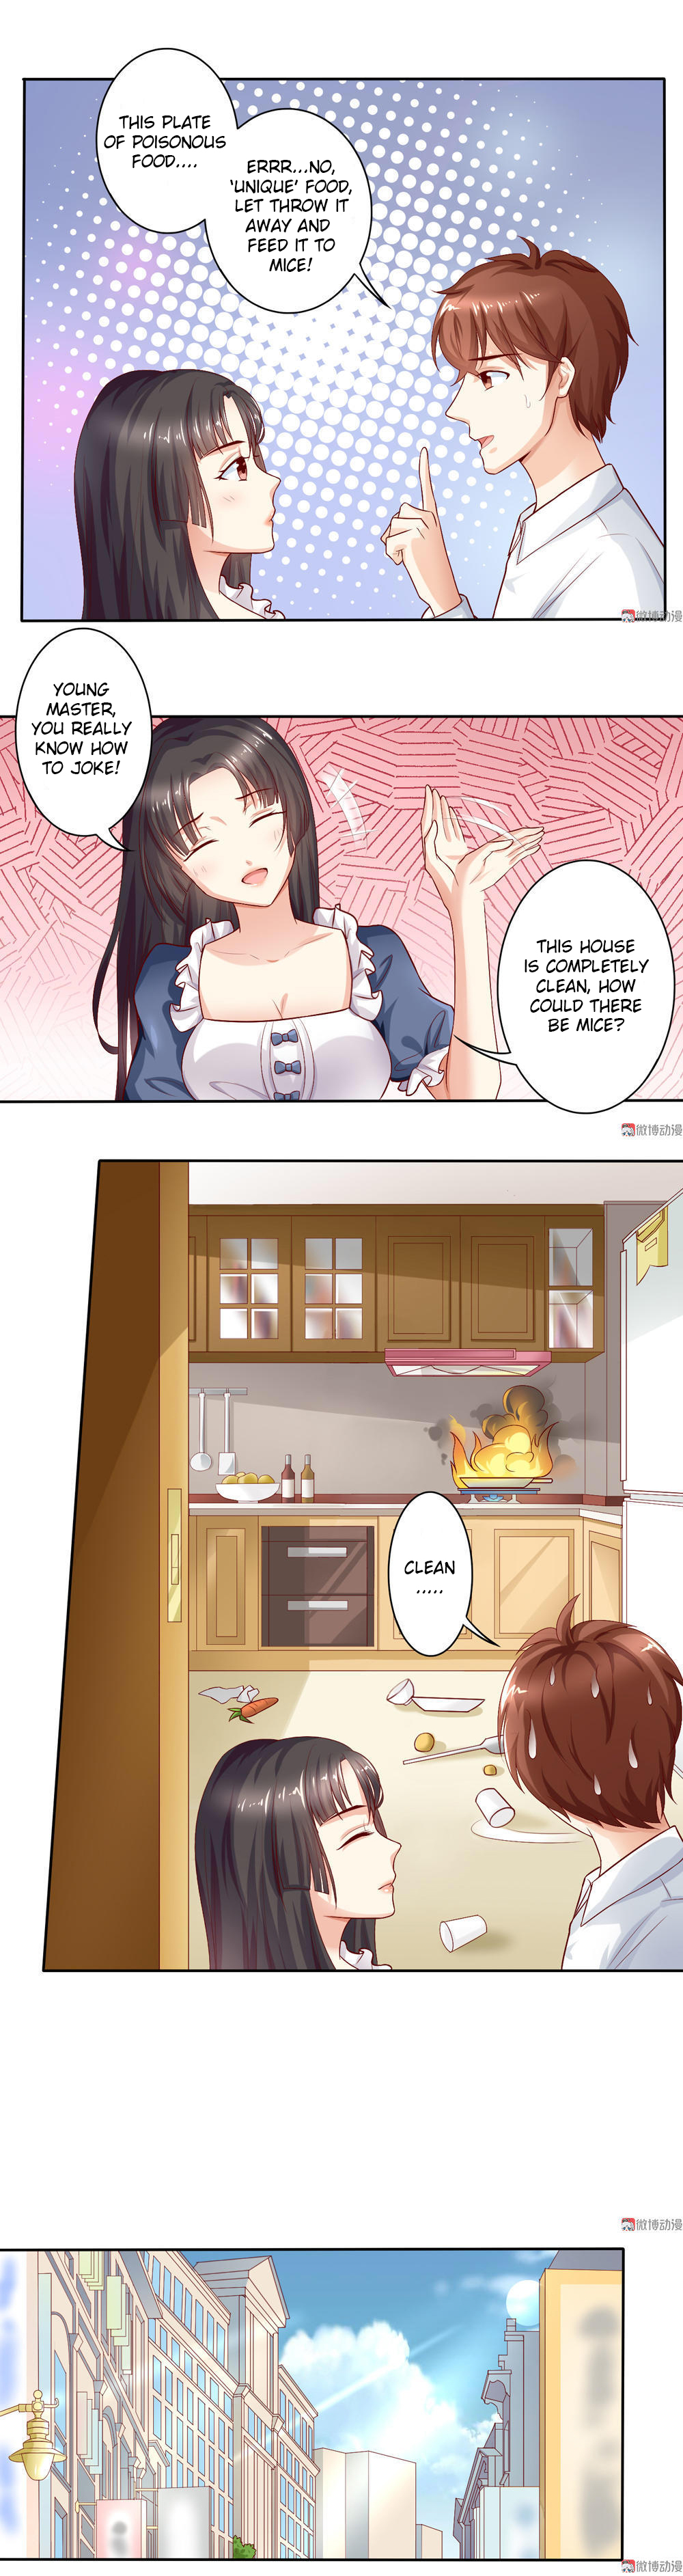 My 36D Maid - Page 2